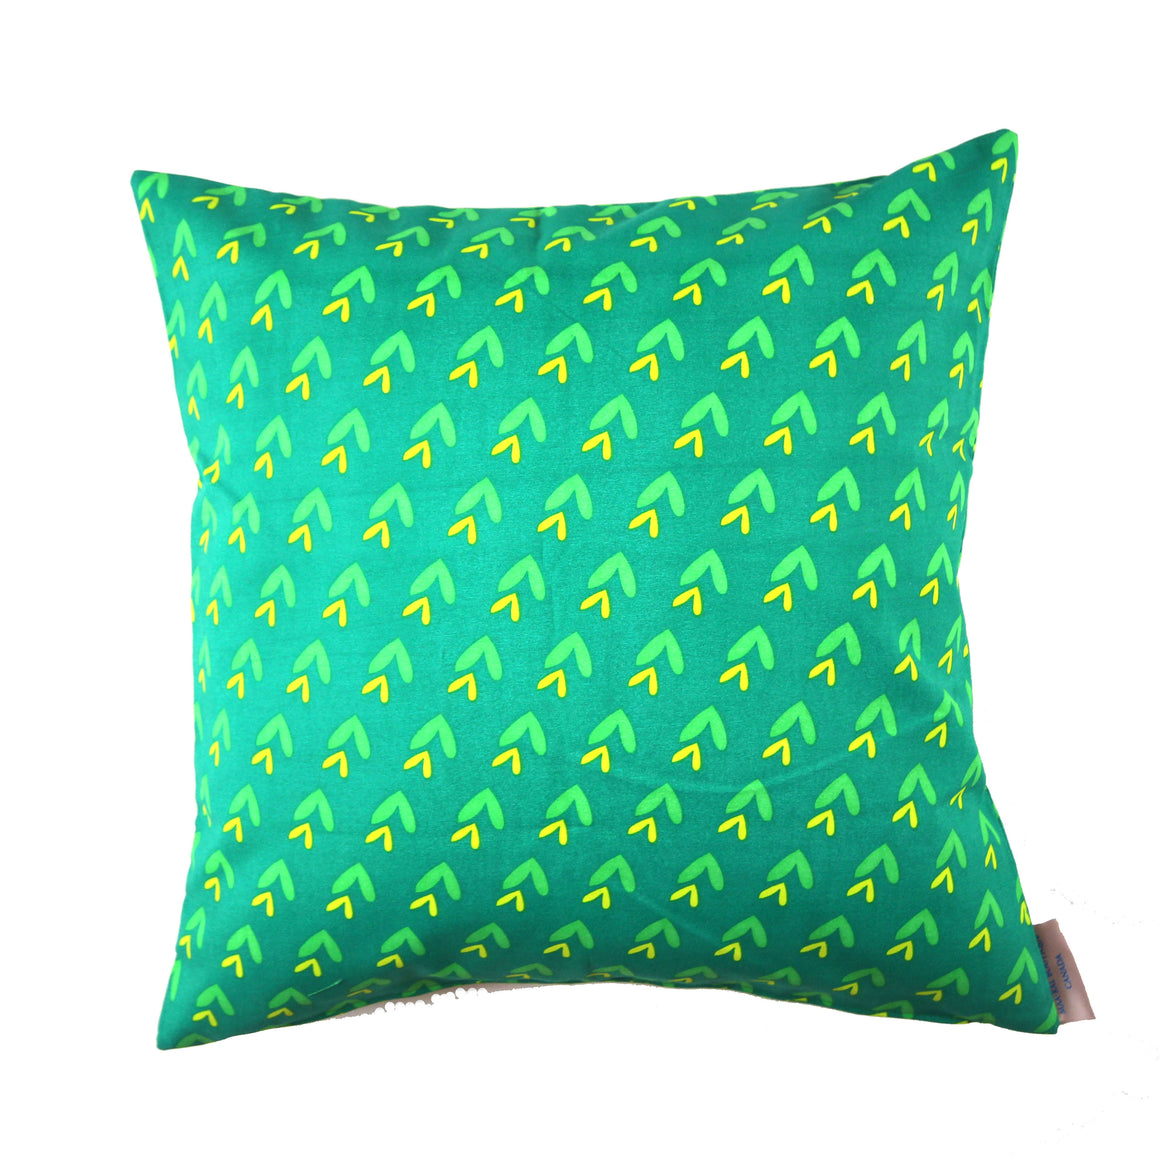 Junior - Vibrant Green with Yellow Geometric Patterns Pillow Cover - 20x20 - Maa-Kal Boutique Canada